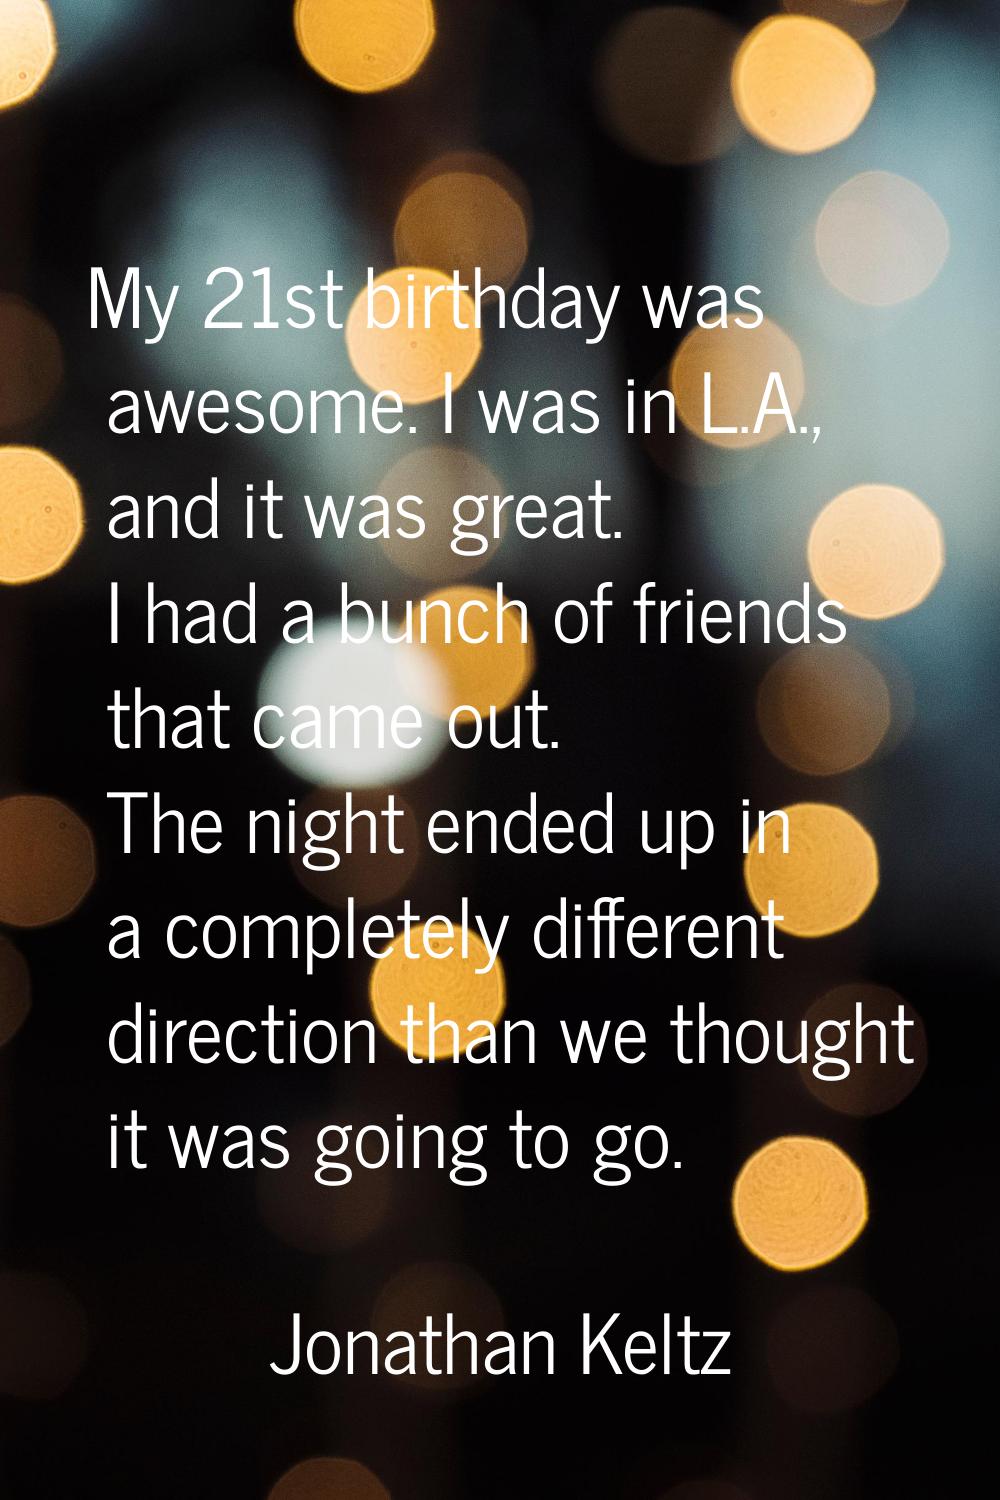 My 21st birthday was awesome. I was in L.A., and it was great. I had a bunch of friends that came o